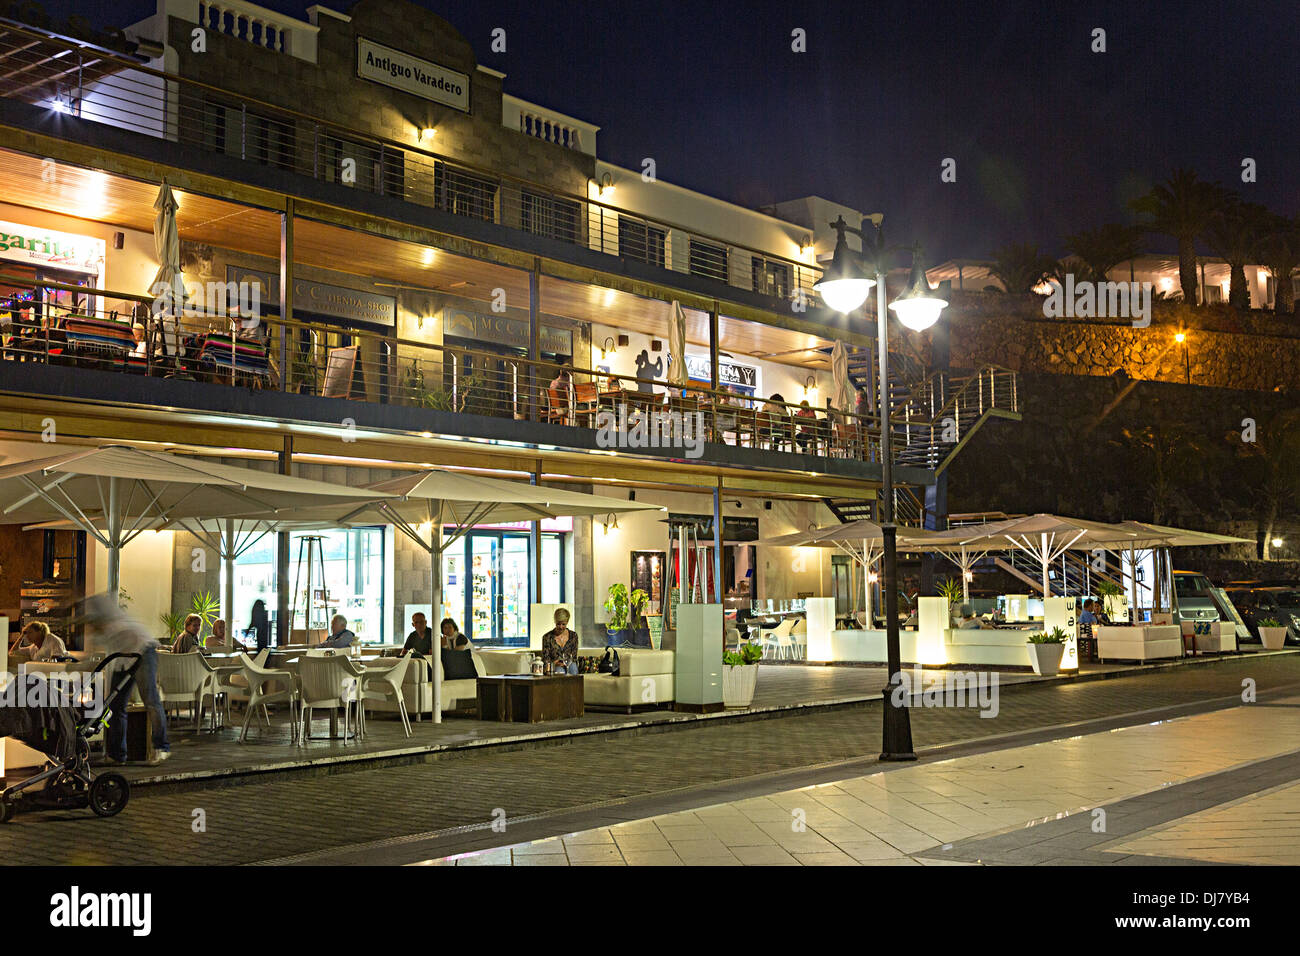 People sitting outside at bars and restaurants, Puerto Calero, Lanzarote, Canary Islands, Spain Stock Photo